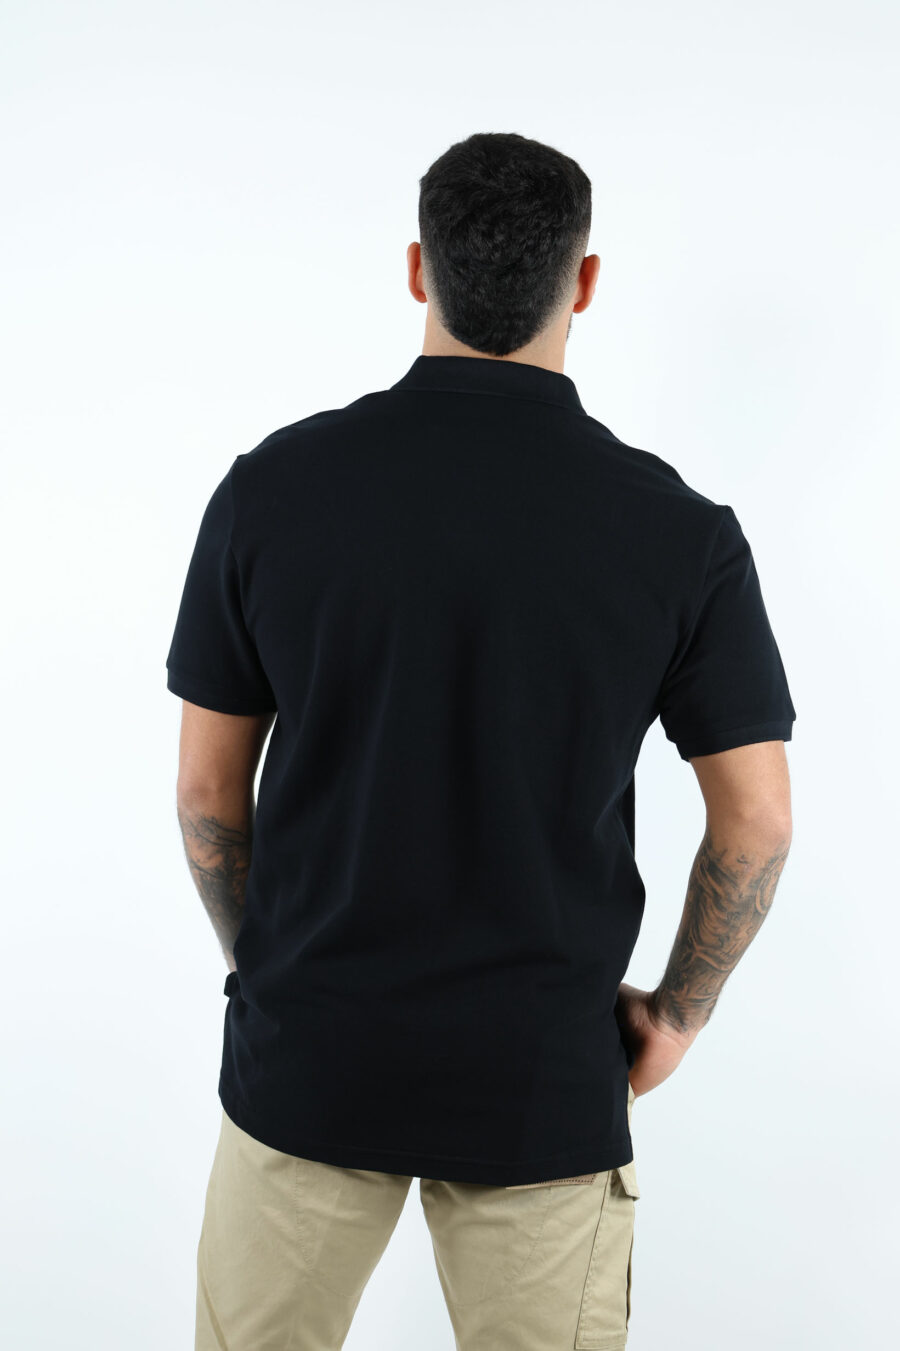 Black polo shirt with logo "in love we trust" - 106972